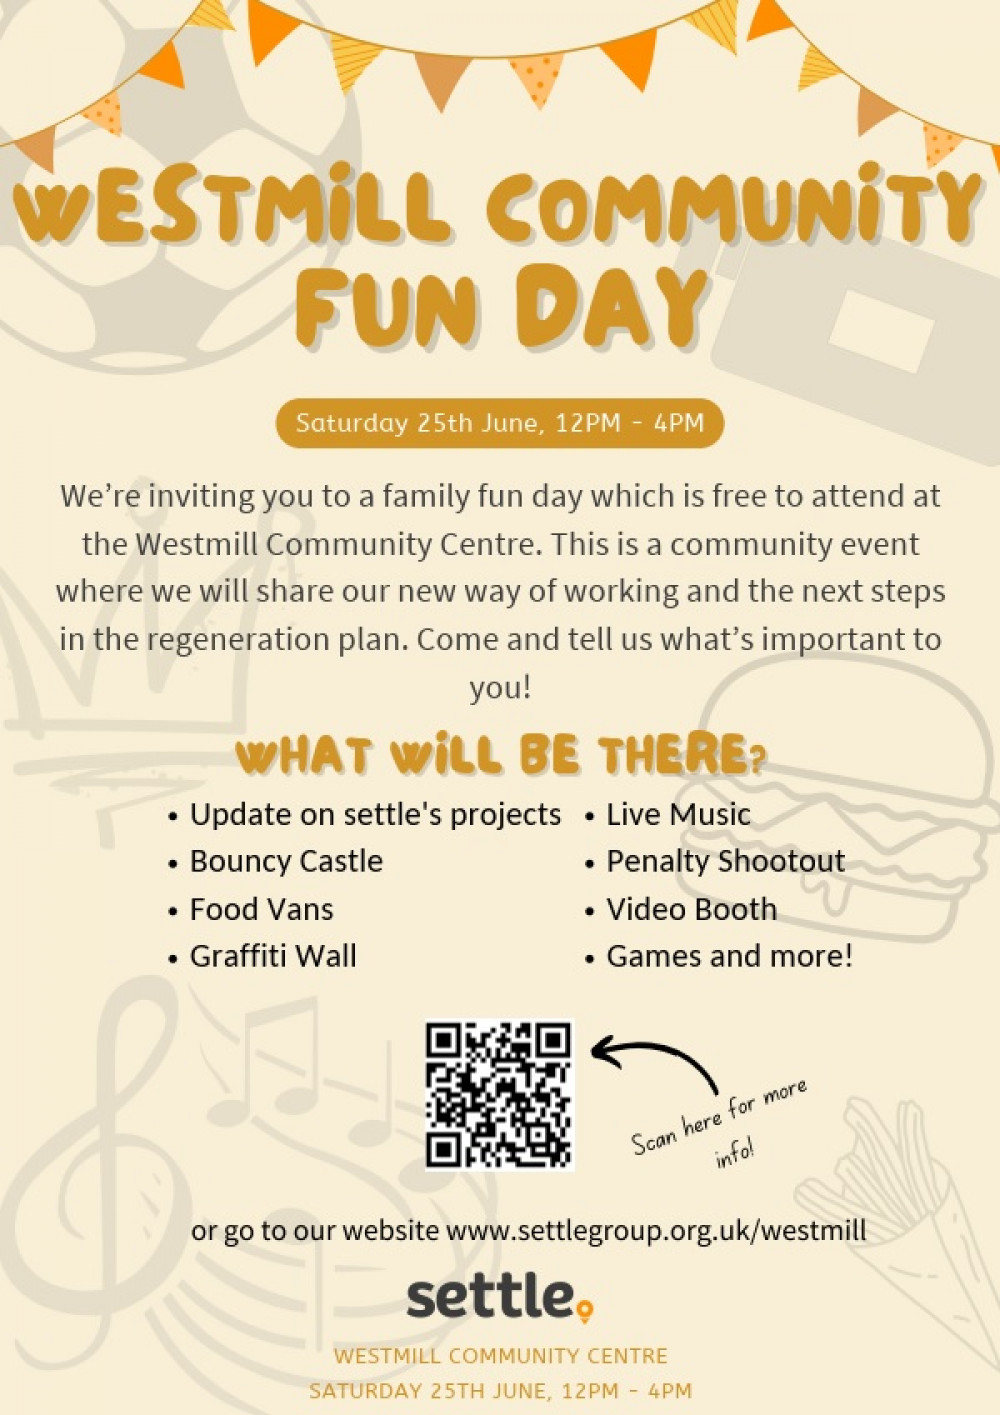 We’re inviting you to a family fun day which is free to attend at the Westmill Community Centre